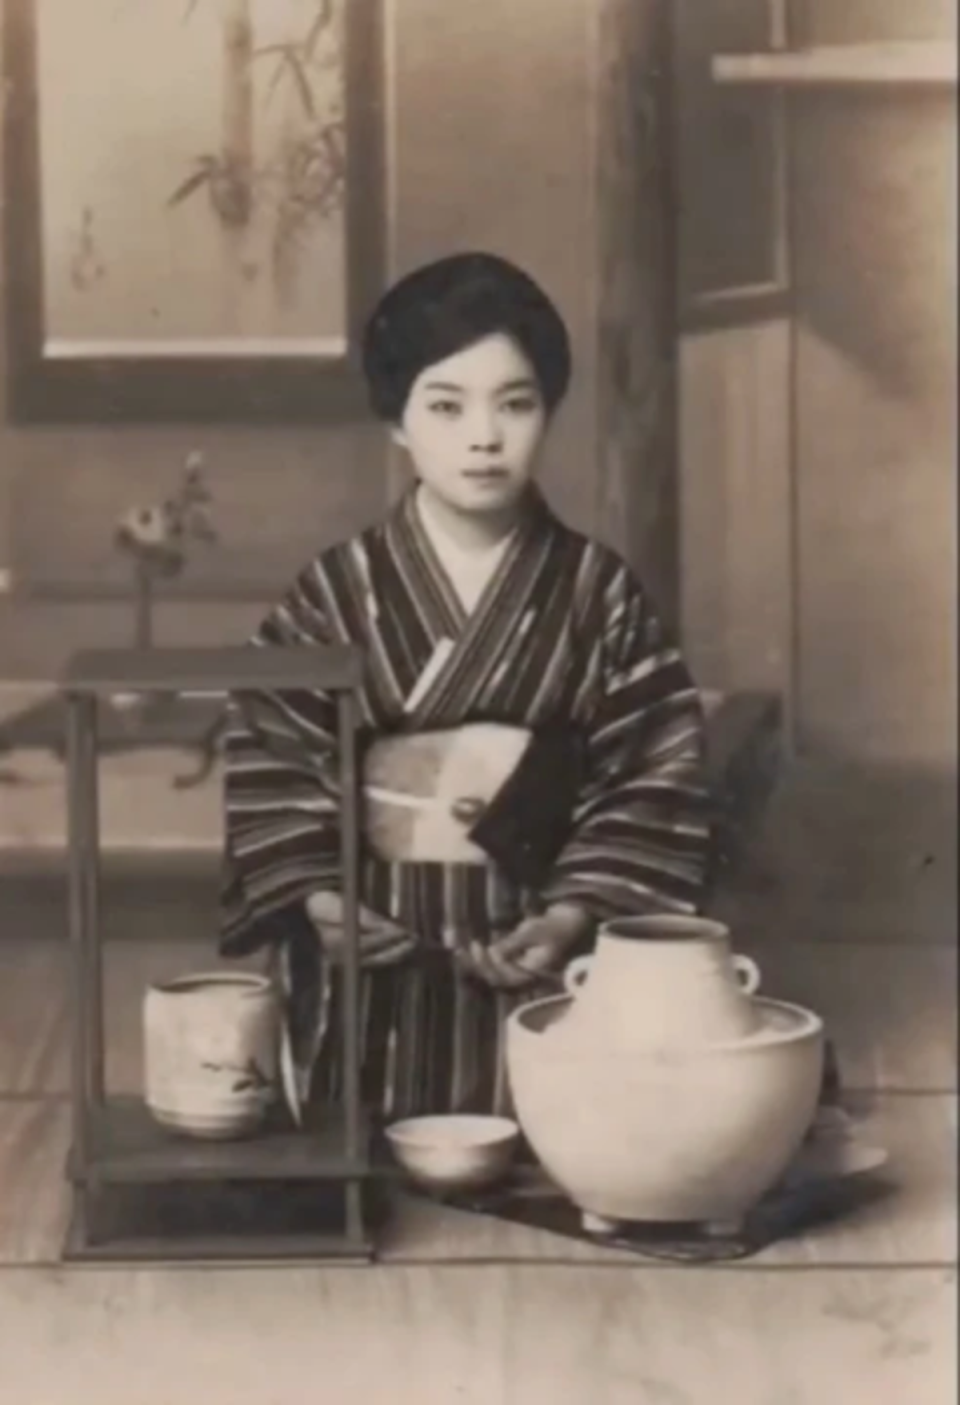  A black and white photo of Fusa Tatsumi taken when she was in her 20s (Wikimedia Commons)